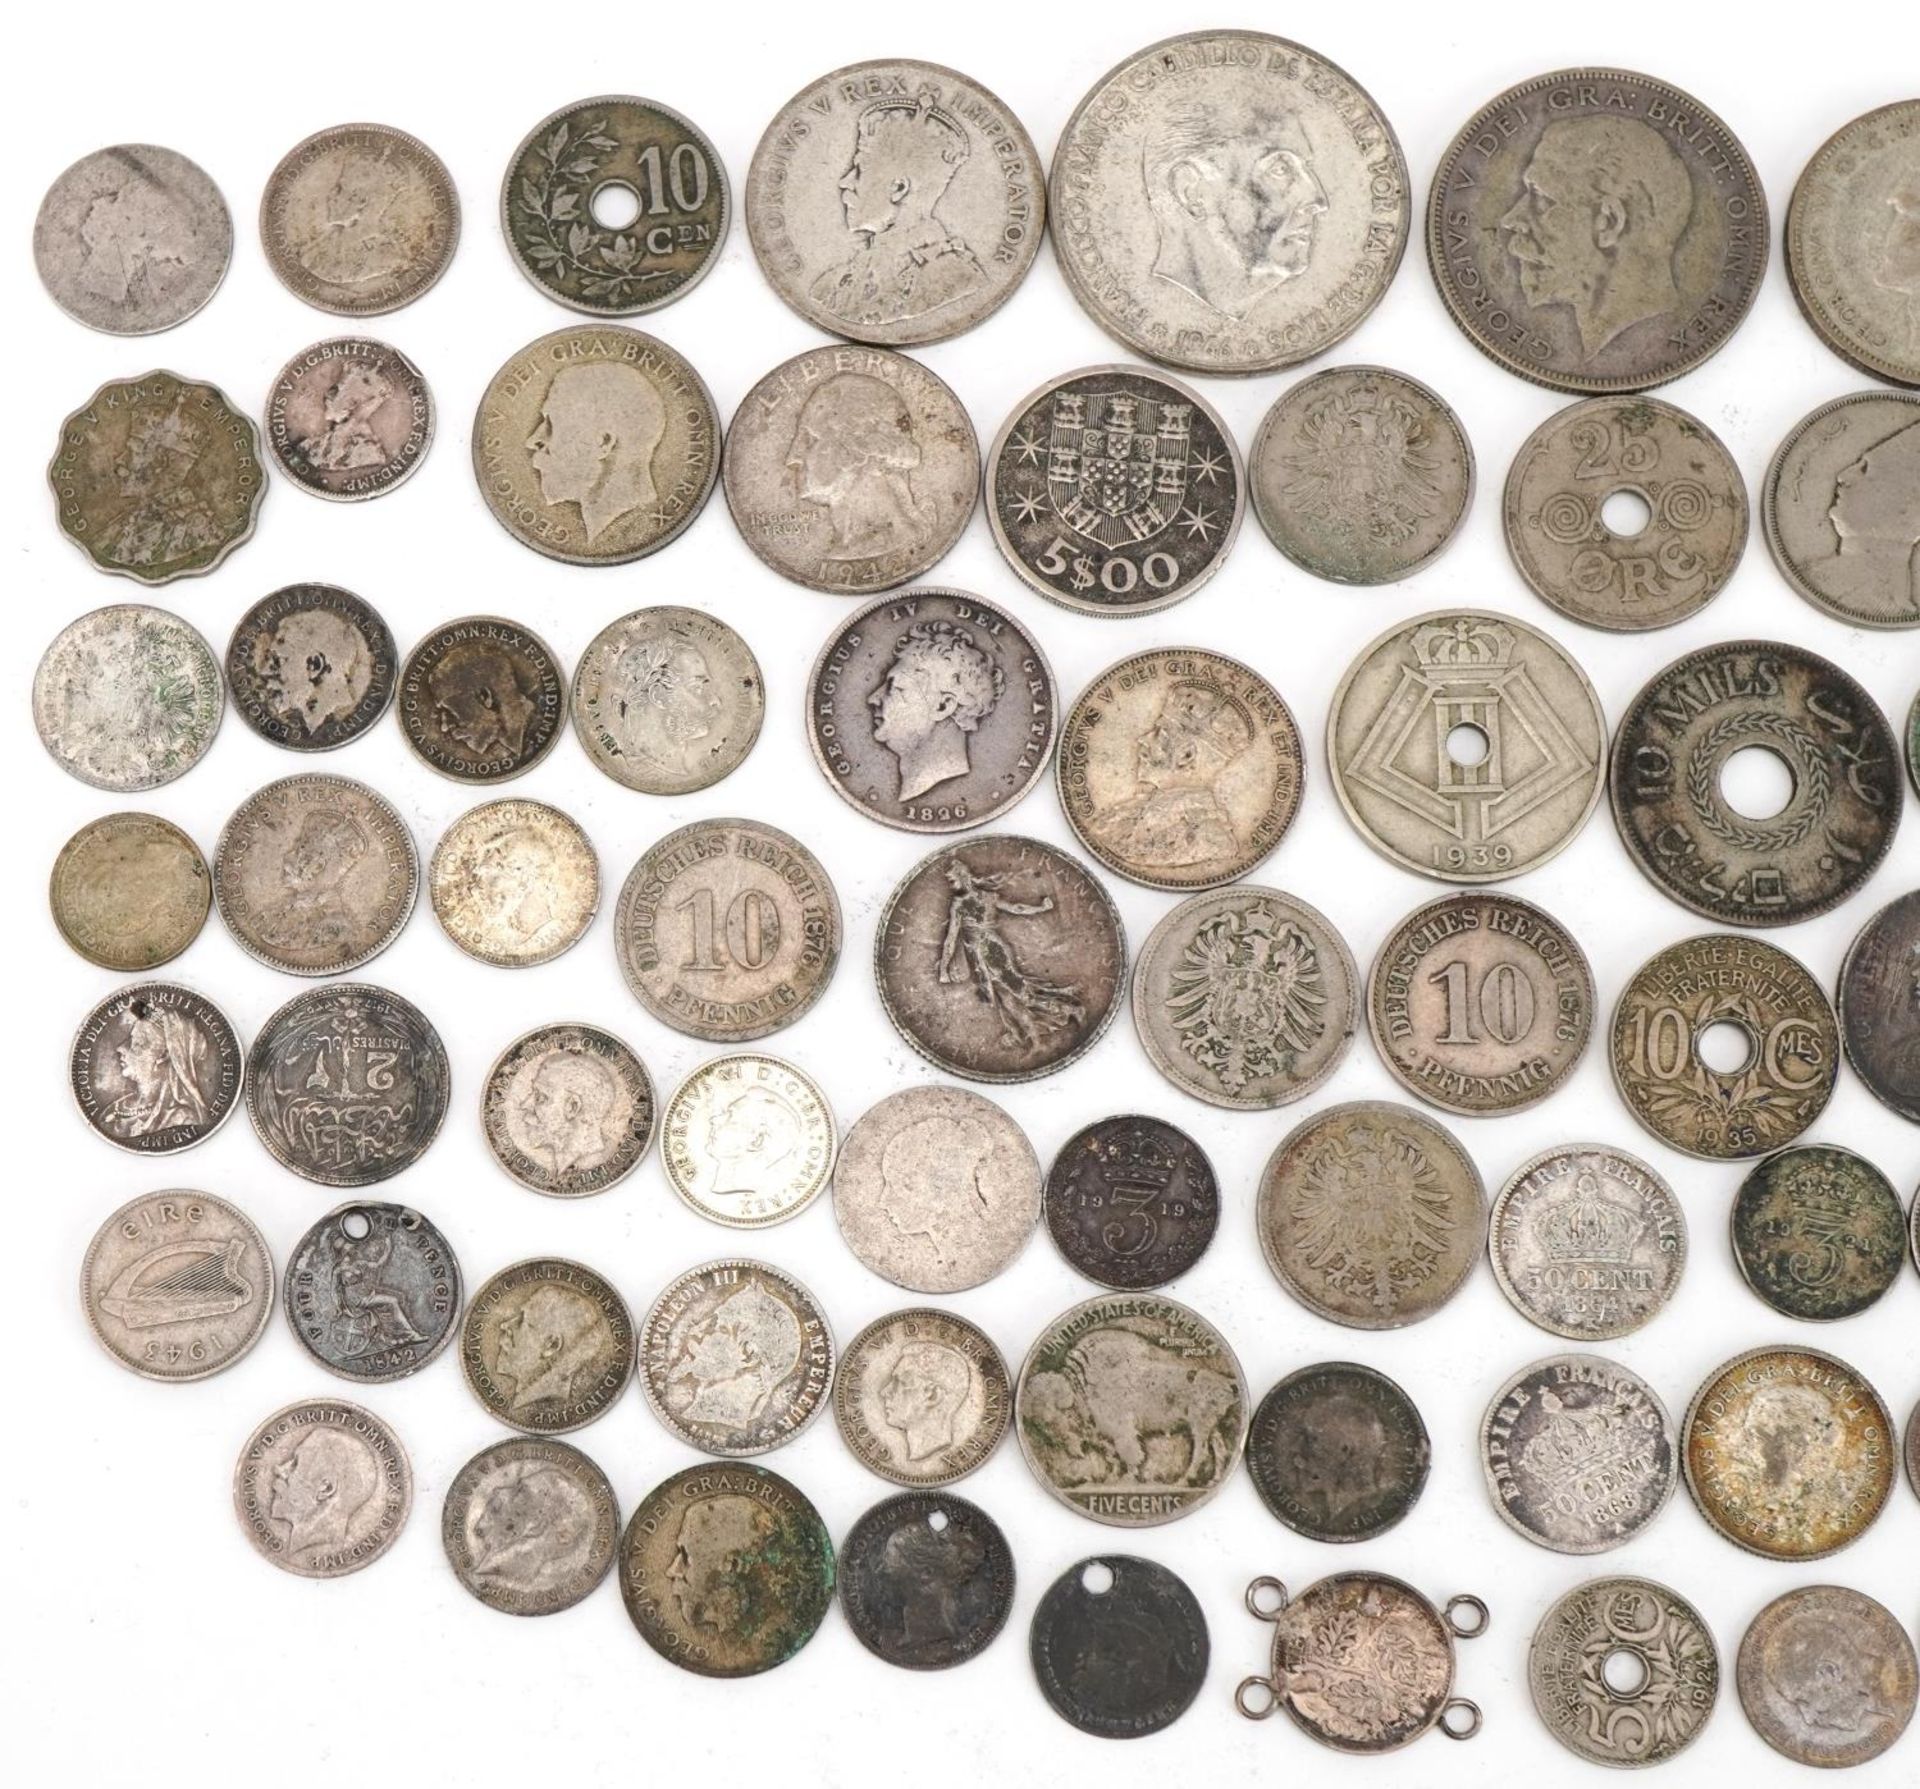 British and world coinage including one hundred ptas, half crowns and 1870 maundy twopence, 250g : - Image 5 of 6